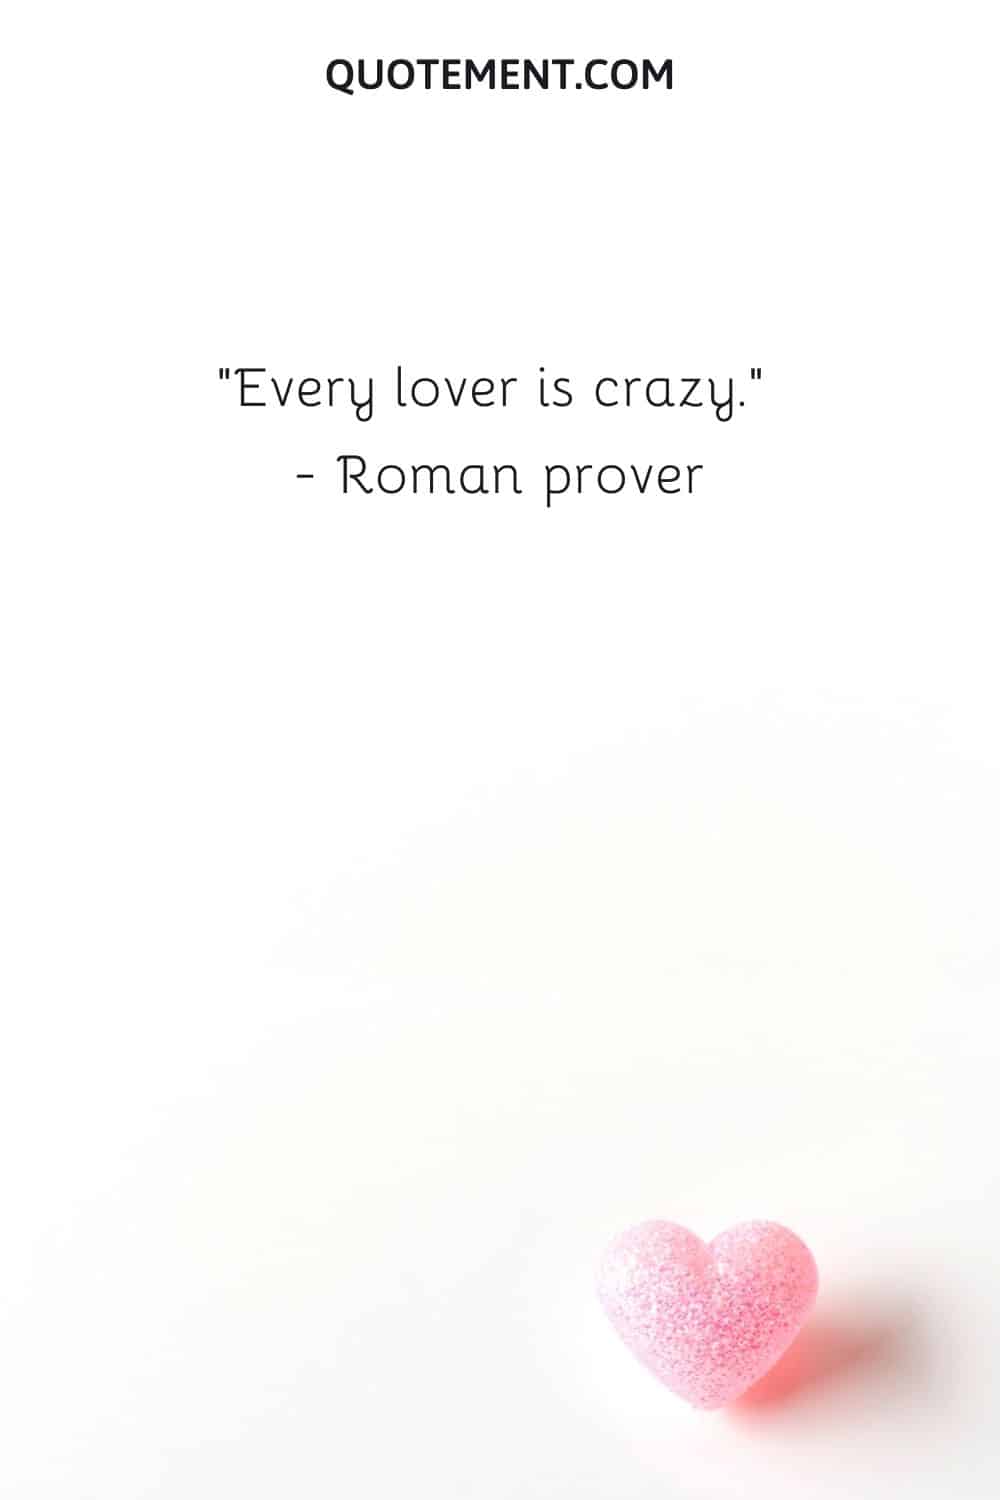 Every lover is crazy.